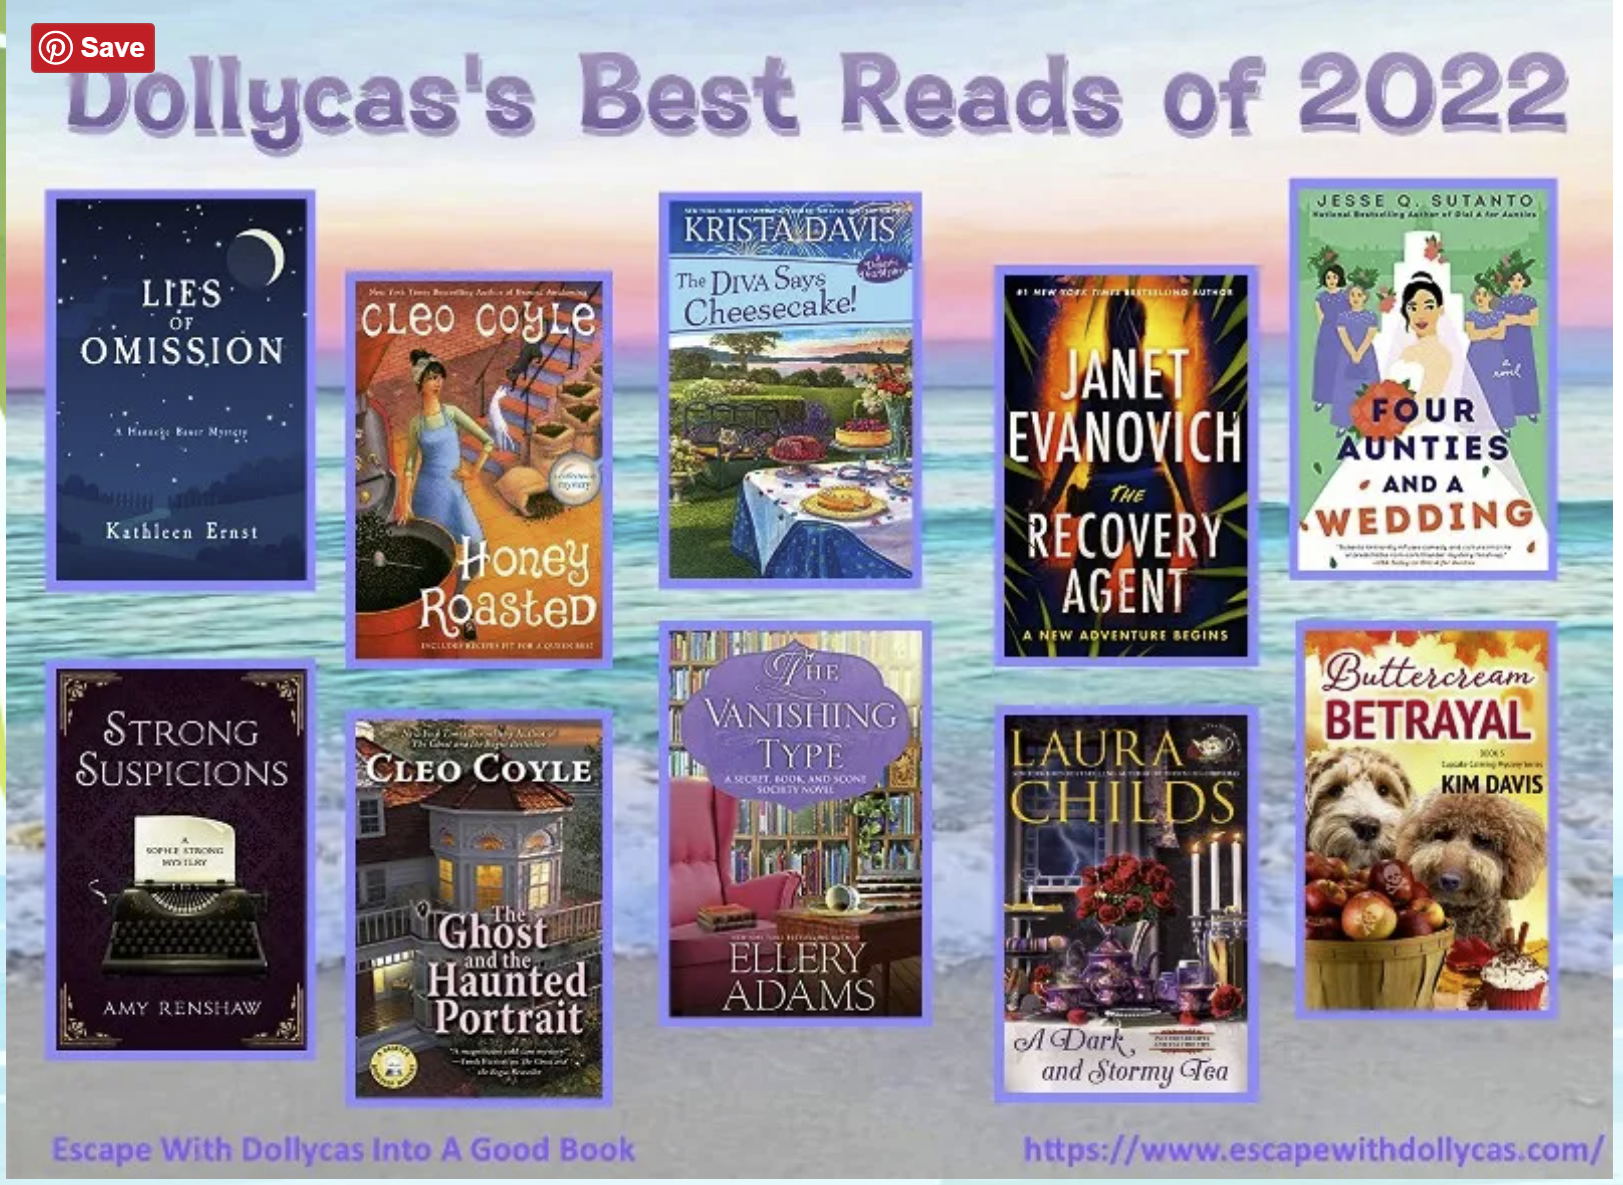 Enter for a chance to win a copy of BUTTERCREAM BETRAYAL, one of the top ten best books on Escape with Dollycas Into A Good Book 2022 reading list! 